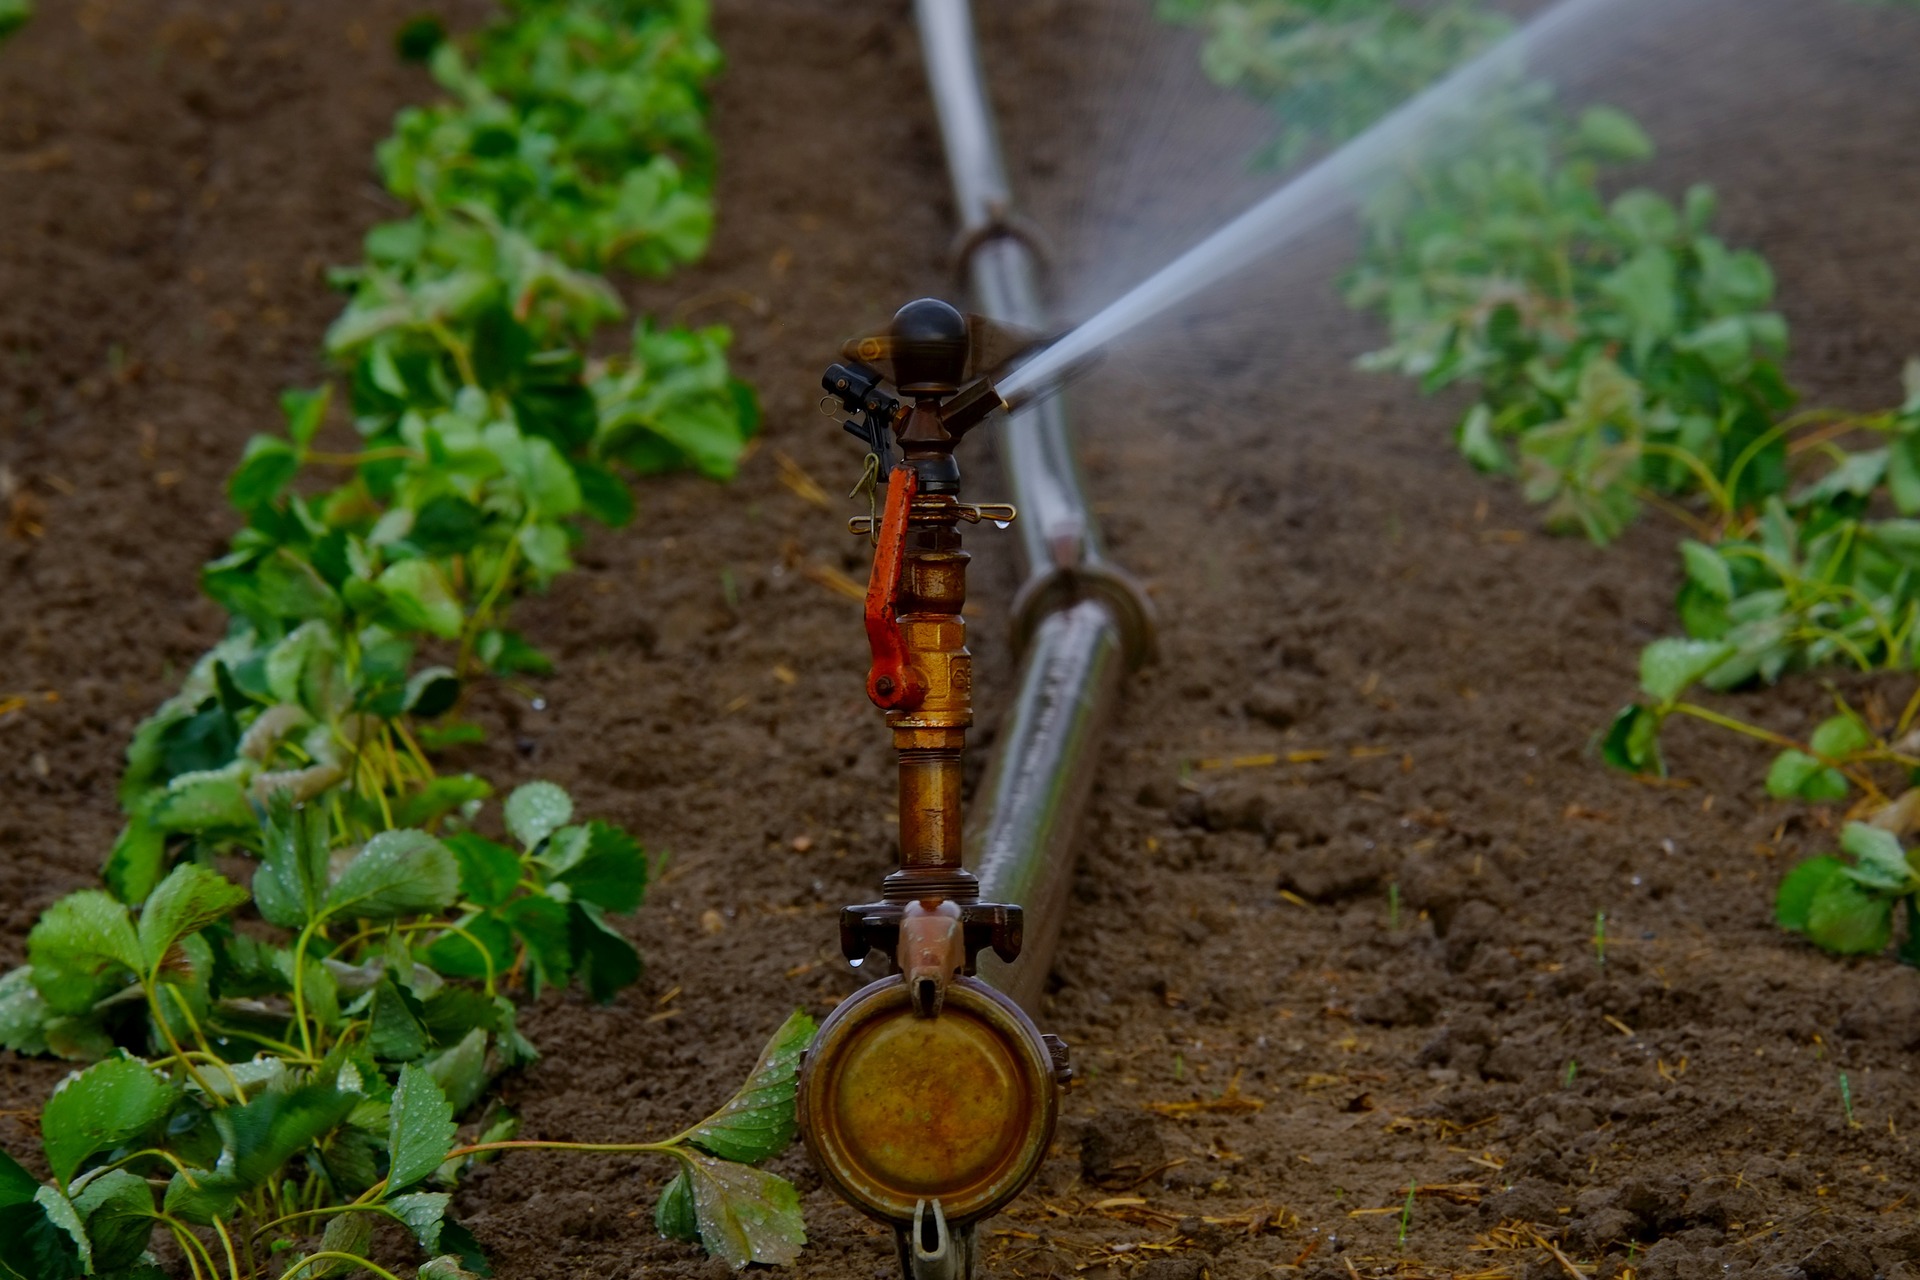 Water governance and agricultural development in Central Asia will be discussed in Tashkent